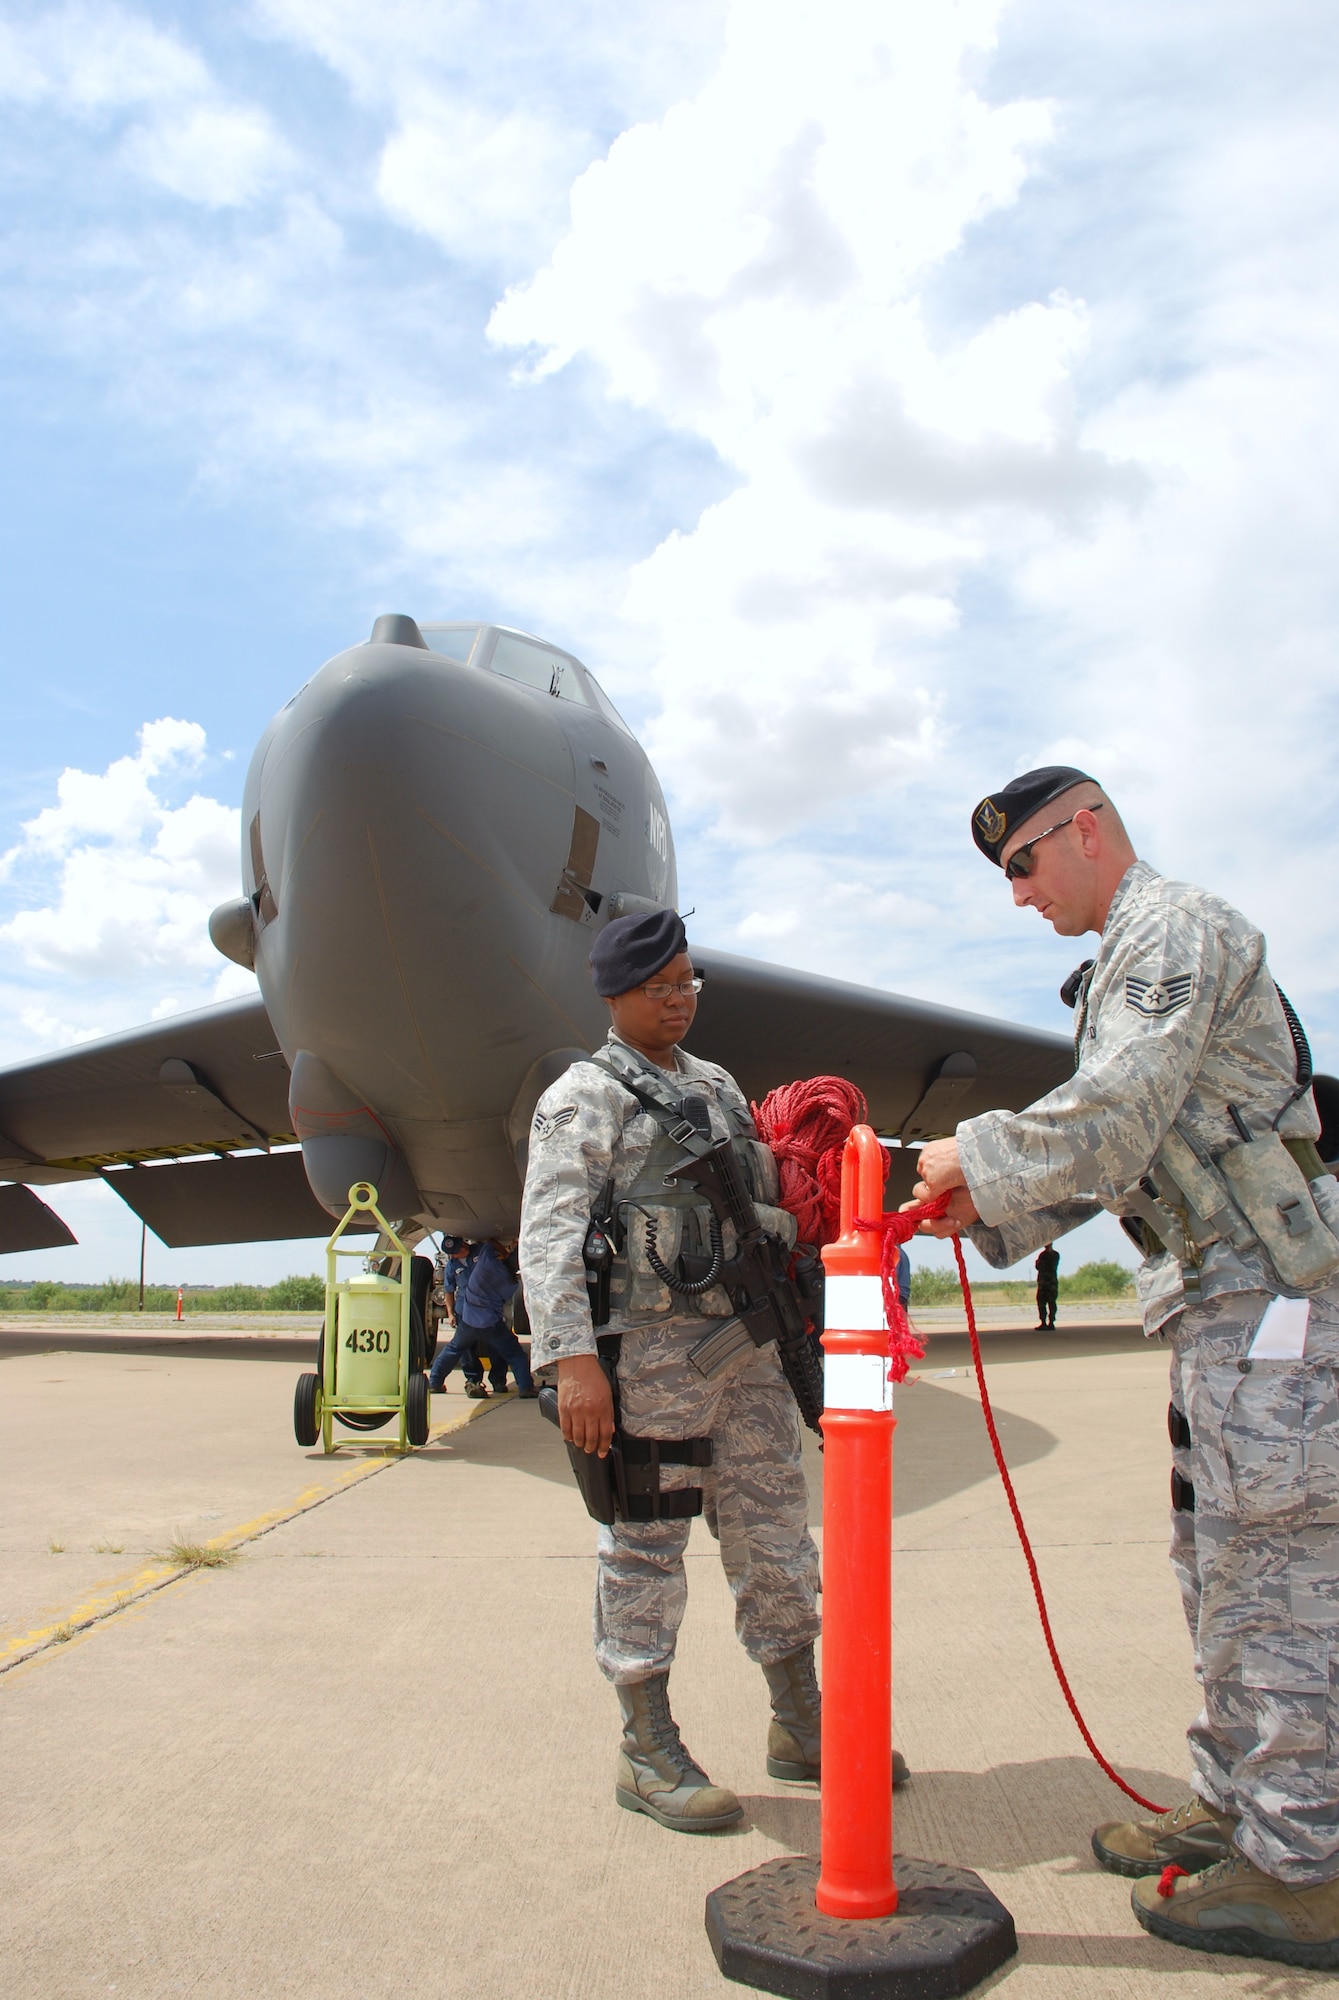 Staff Sgt. Robert Ragland, right, and Senior Airman Alexis Williams of the 82nd Security Forces Squadron set up a perimeter Sept. 9 around a B-52H Stratofortress after it landed to become a new ground instructional trainer for the 82nd Training Wing. The B-52H, was part of the first strike force to respond to the events of Sept. 11, 2001. The aircraft has nose art in memory of the event and those who lost their lives. (U.S. Air Force photo/John Ingle)